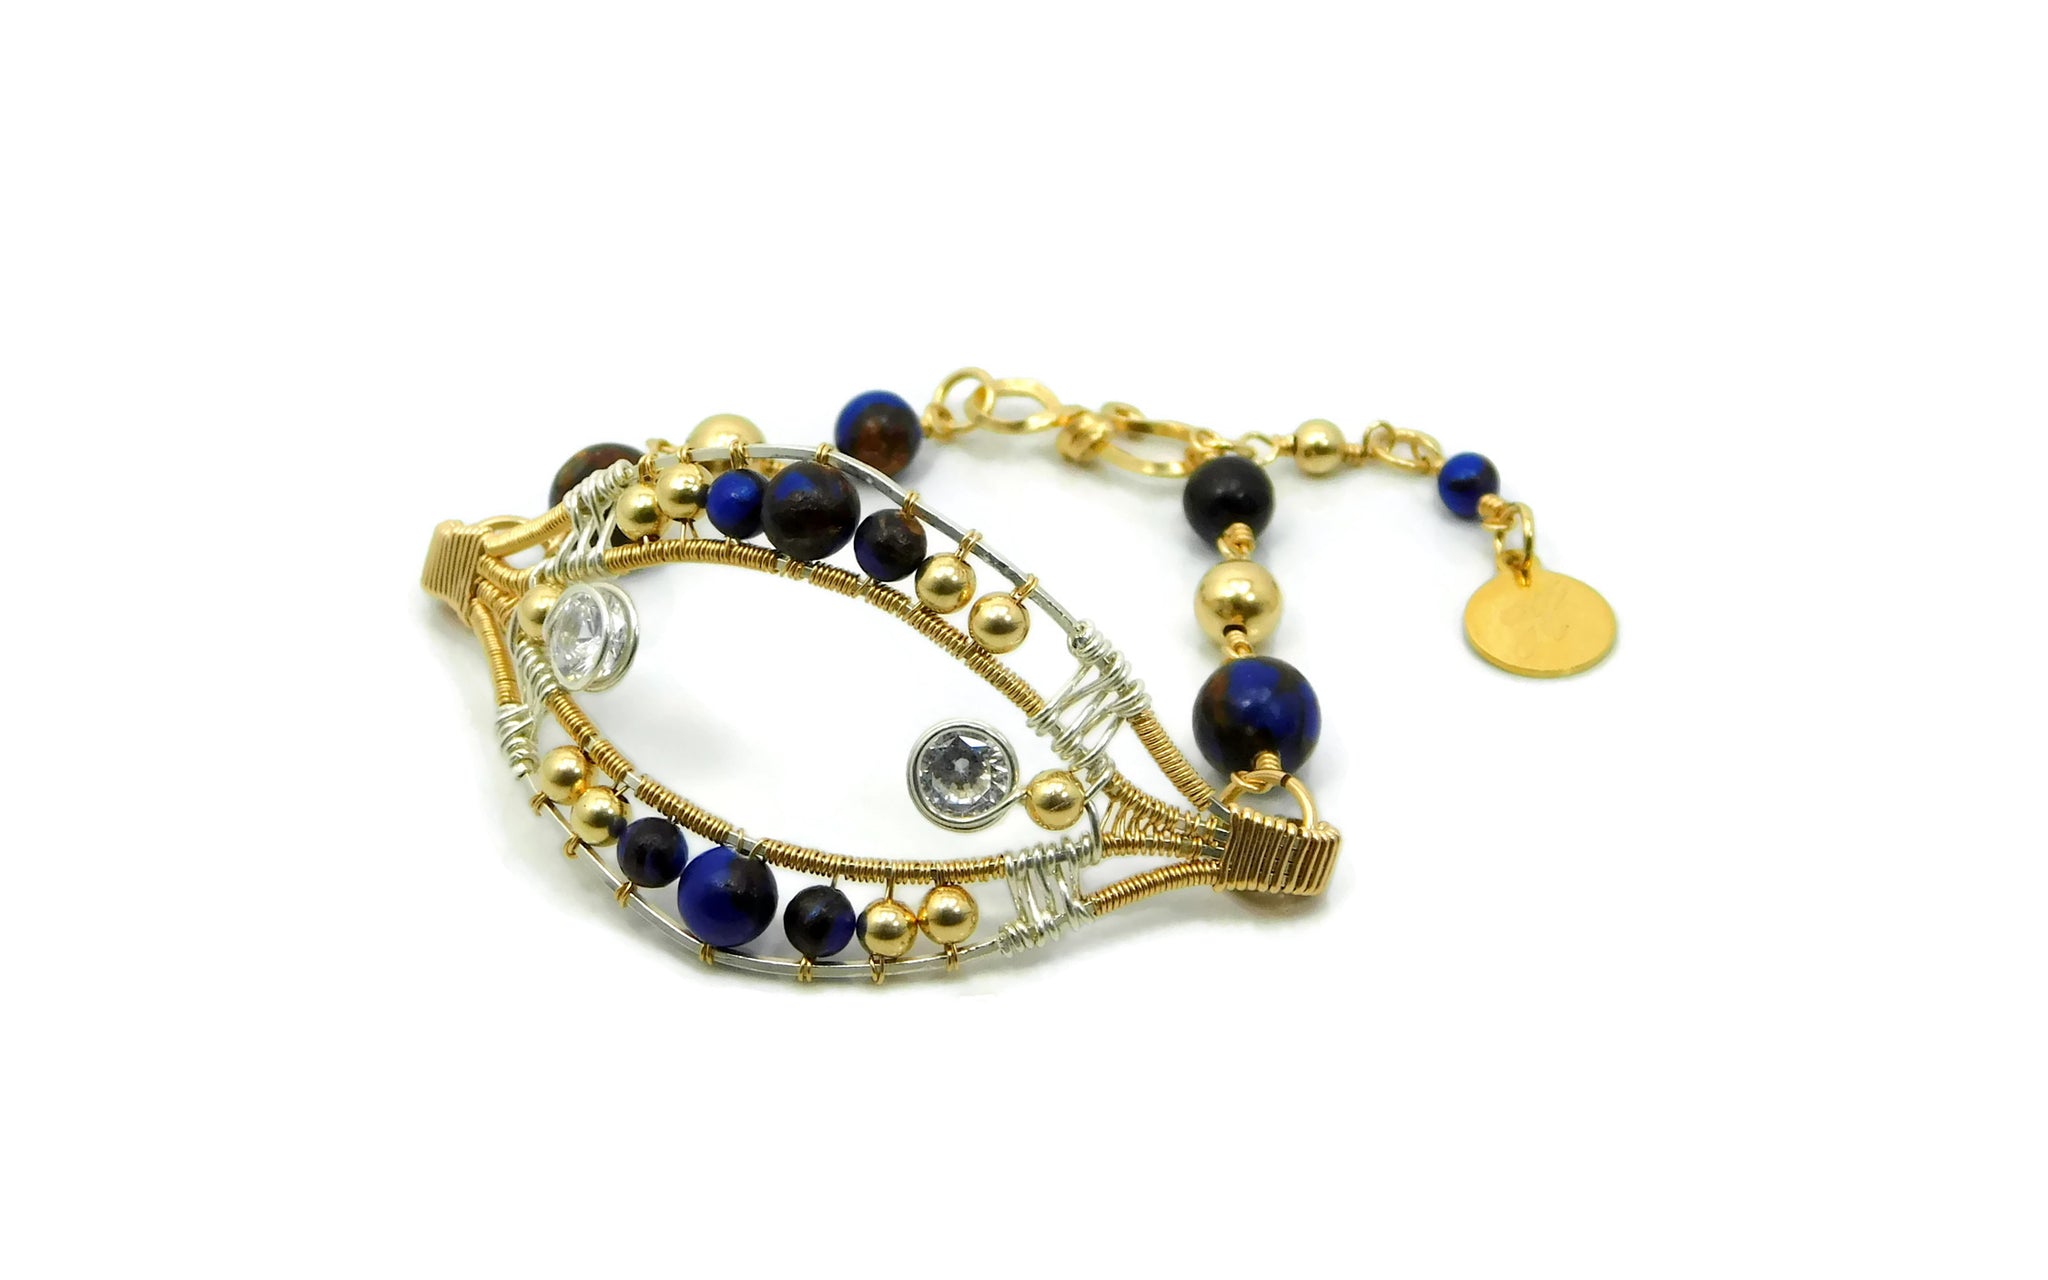 Lapis & Bronzite Joy Bracelet with Herkimer Diamonds in 14kt gold fill and sterling silver wrap bracelet wire wrap bracelet cold fusion jewelry gold and silver jewelry handmade silver jewelry sterling silver jewelry artisan jewelry handmade gemstone jewelry one of a kind jewelry unique jewelry